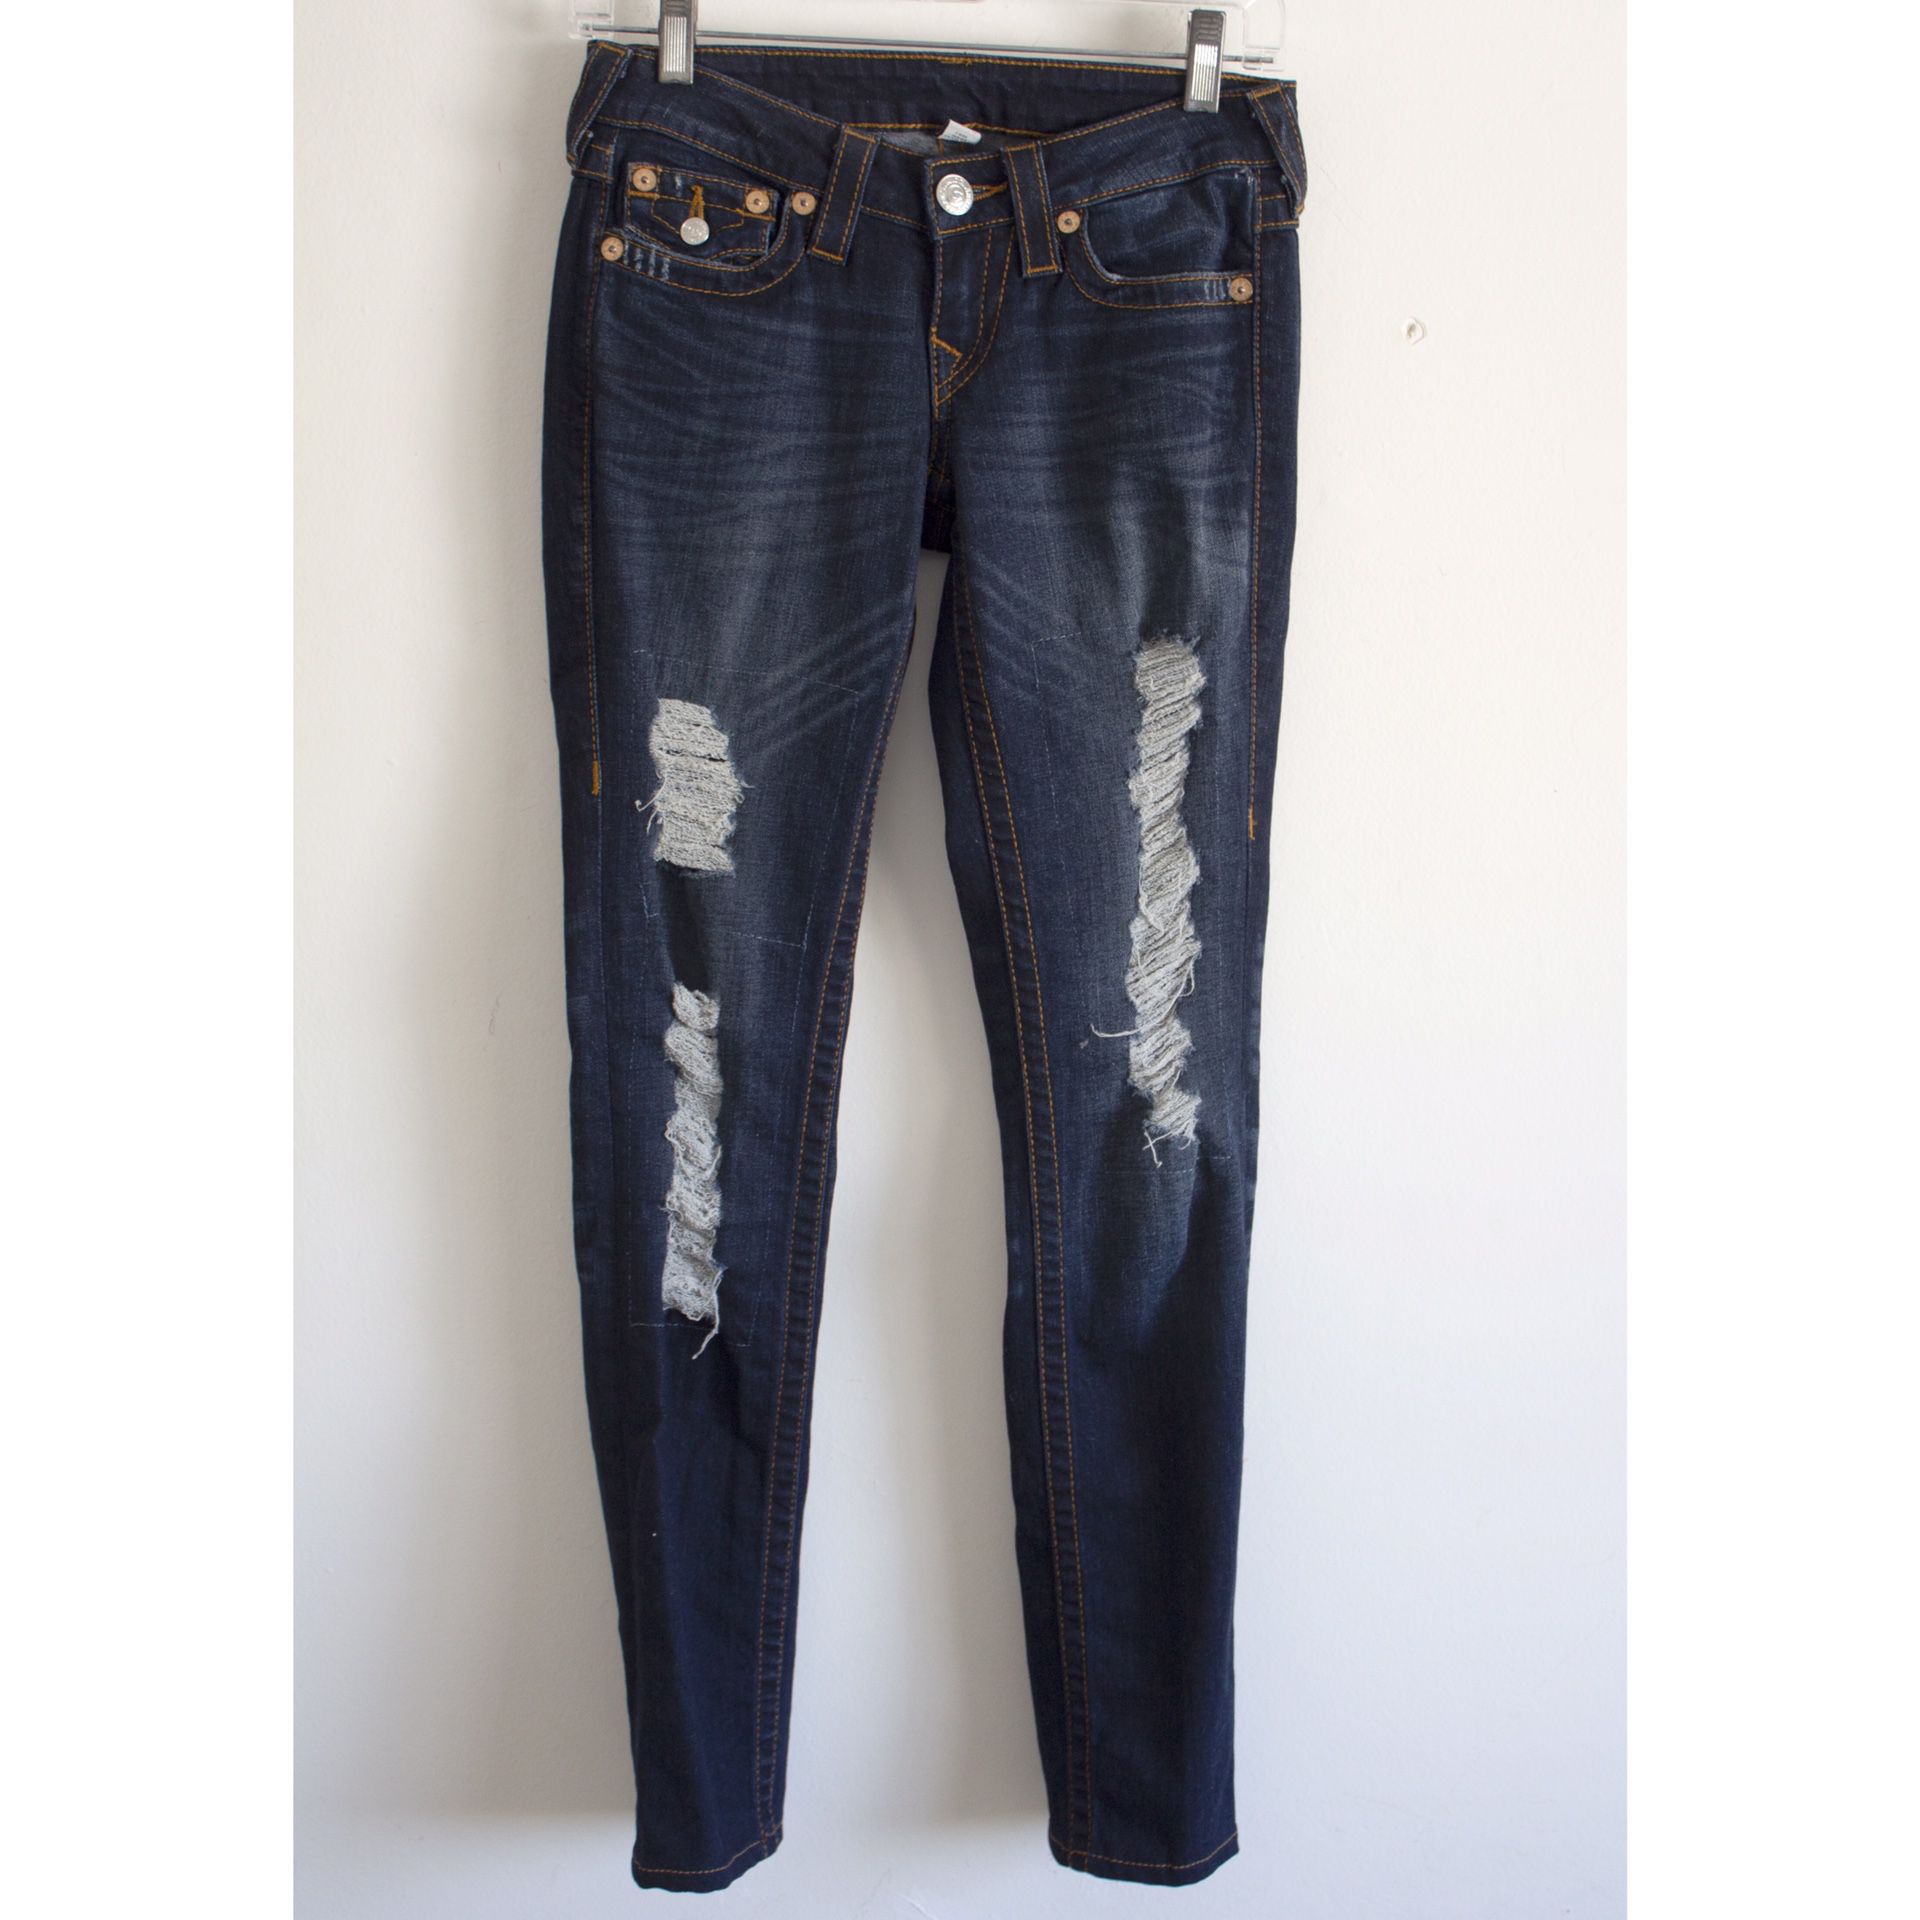 True Religion Ripped Skinny Jeans - Size 25